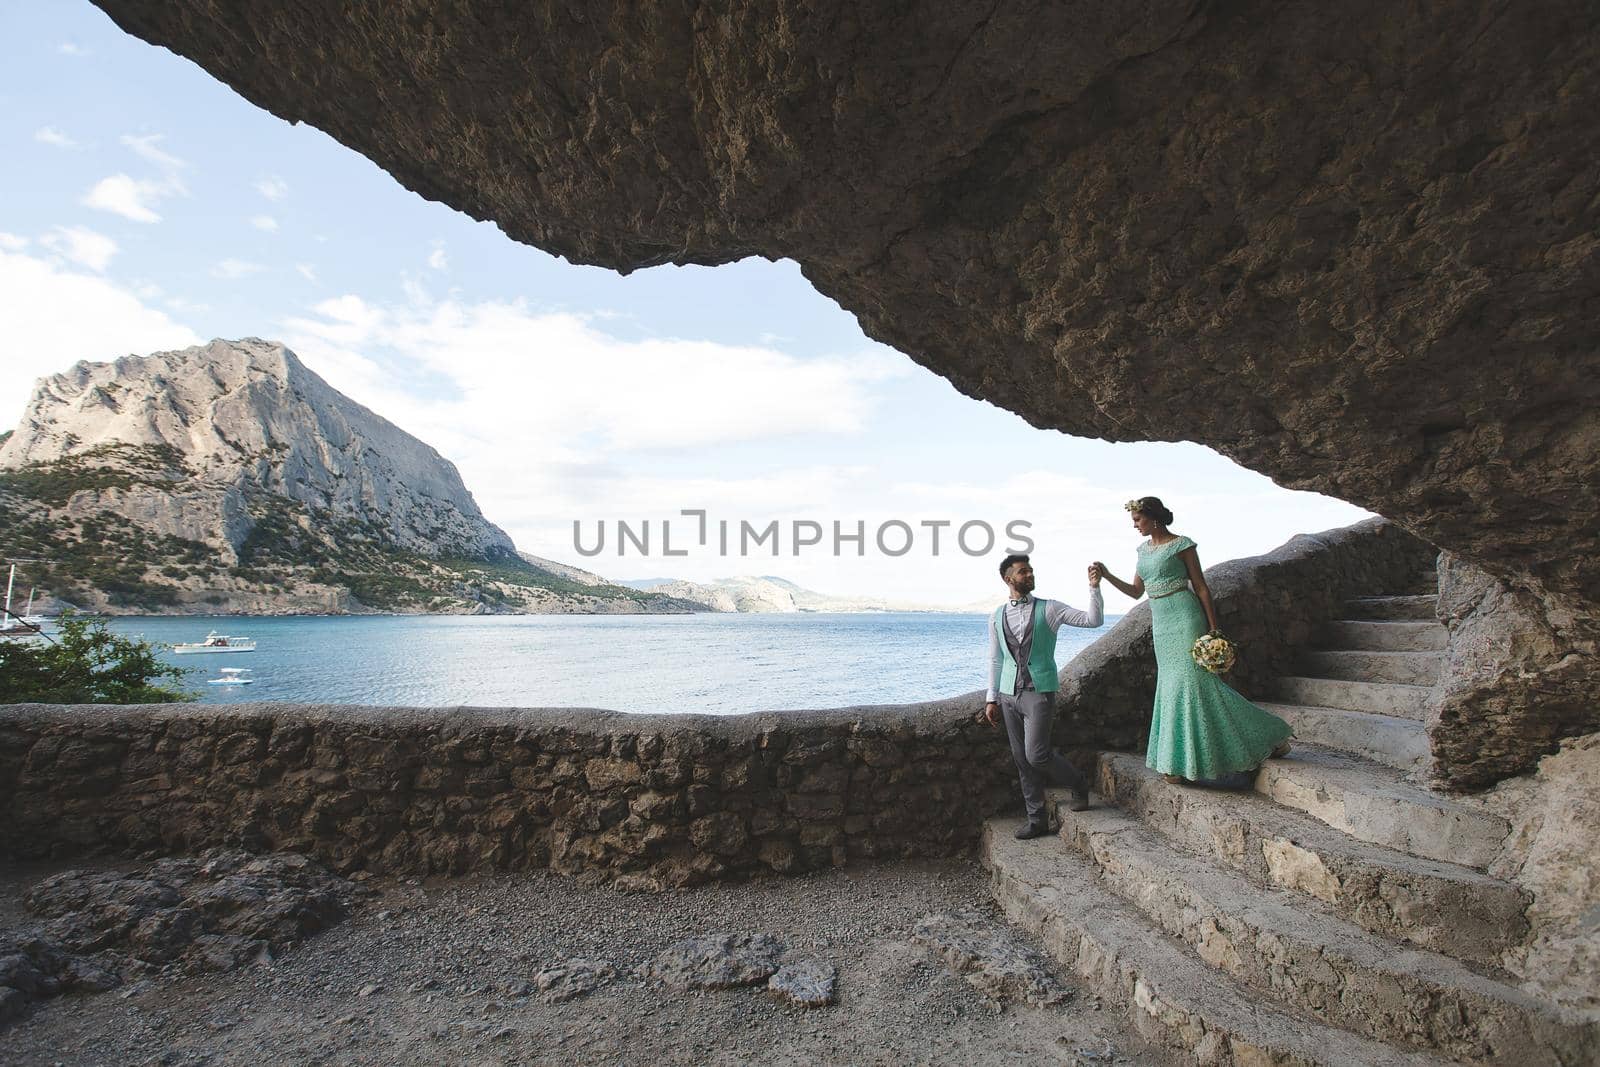 The bride and groom on nature in the mountains near the water. Suit and dress color Tiffany. Walk hand in hand by StudioPeace